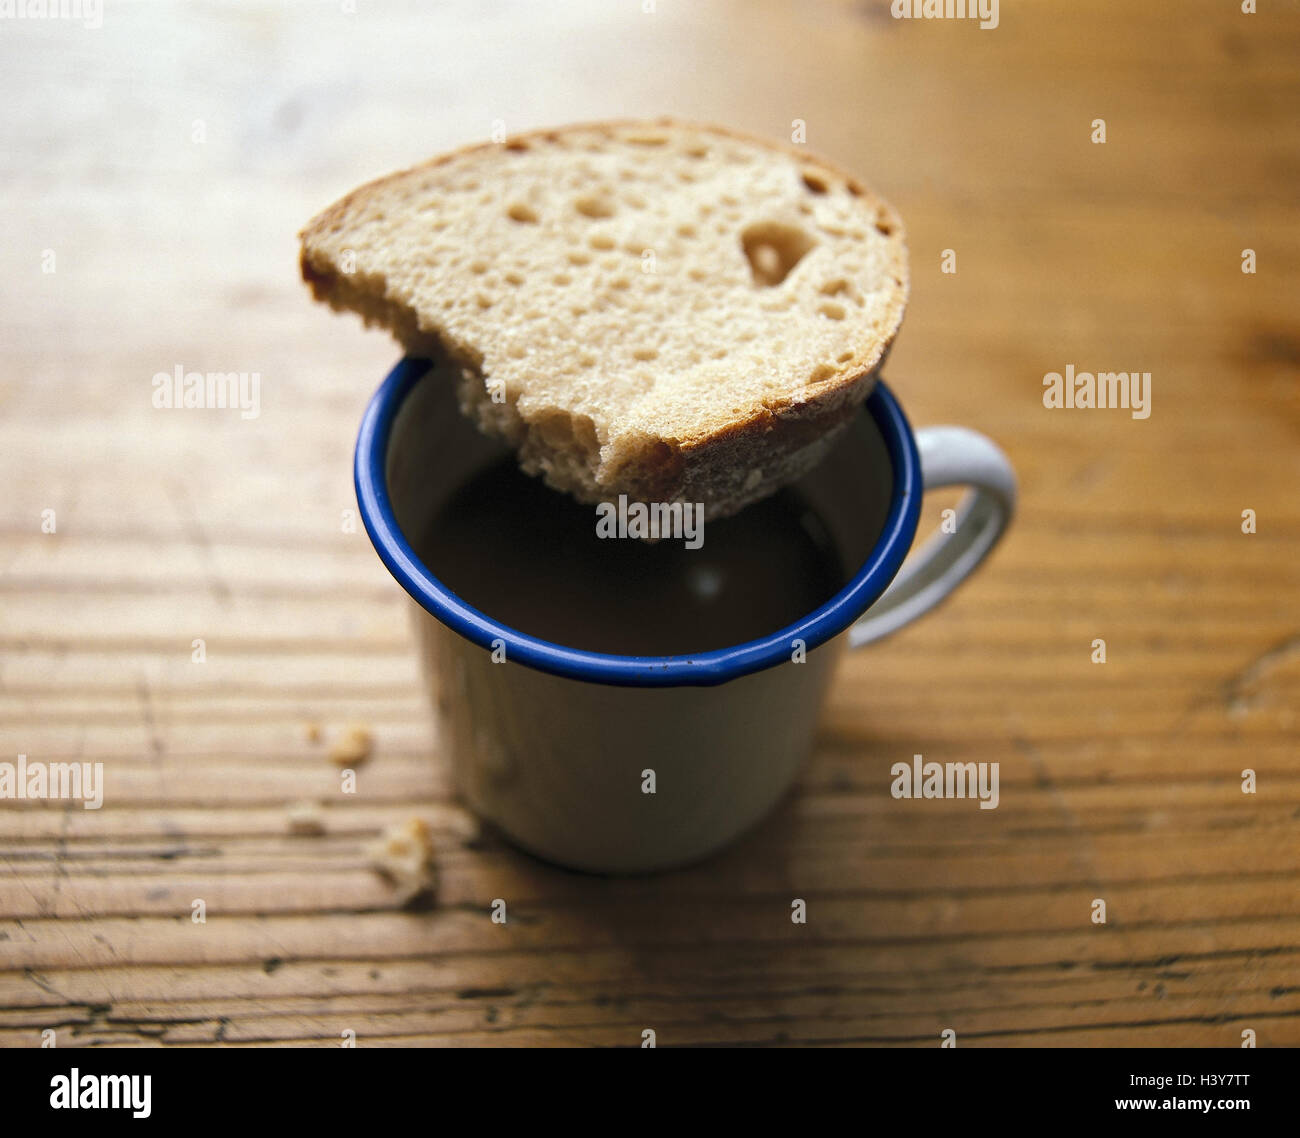 Coffee cup, slice bread, Still life, product photography, cup, mug, coffee, drink, bread, drily, slice, food, drinking, meagerly, poverty, diet, meal, Spartan, of a little, decrease, nutrition, asceticism, thin food, renunciation, discipline, frugality, Stock Photo